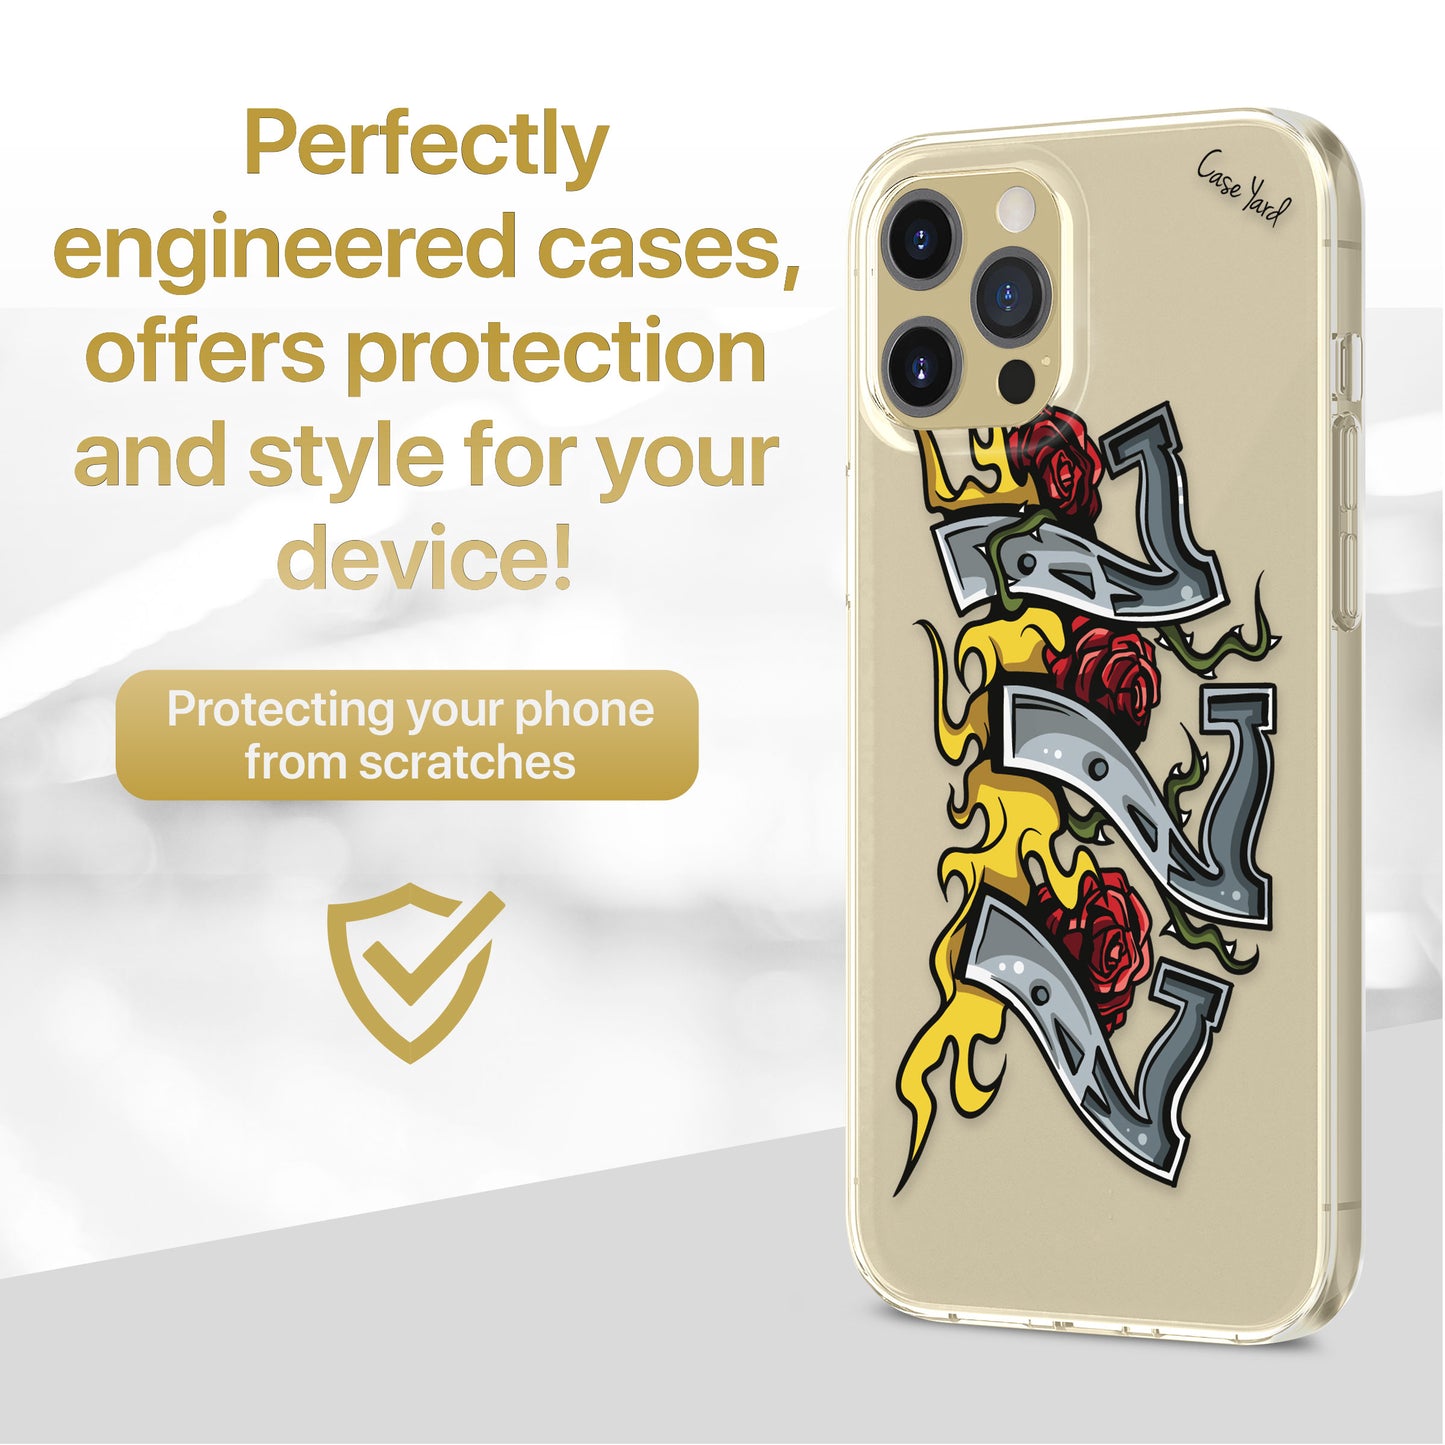 TPU Case Clear case with (777) Design for iPhone & Samsung Phones